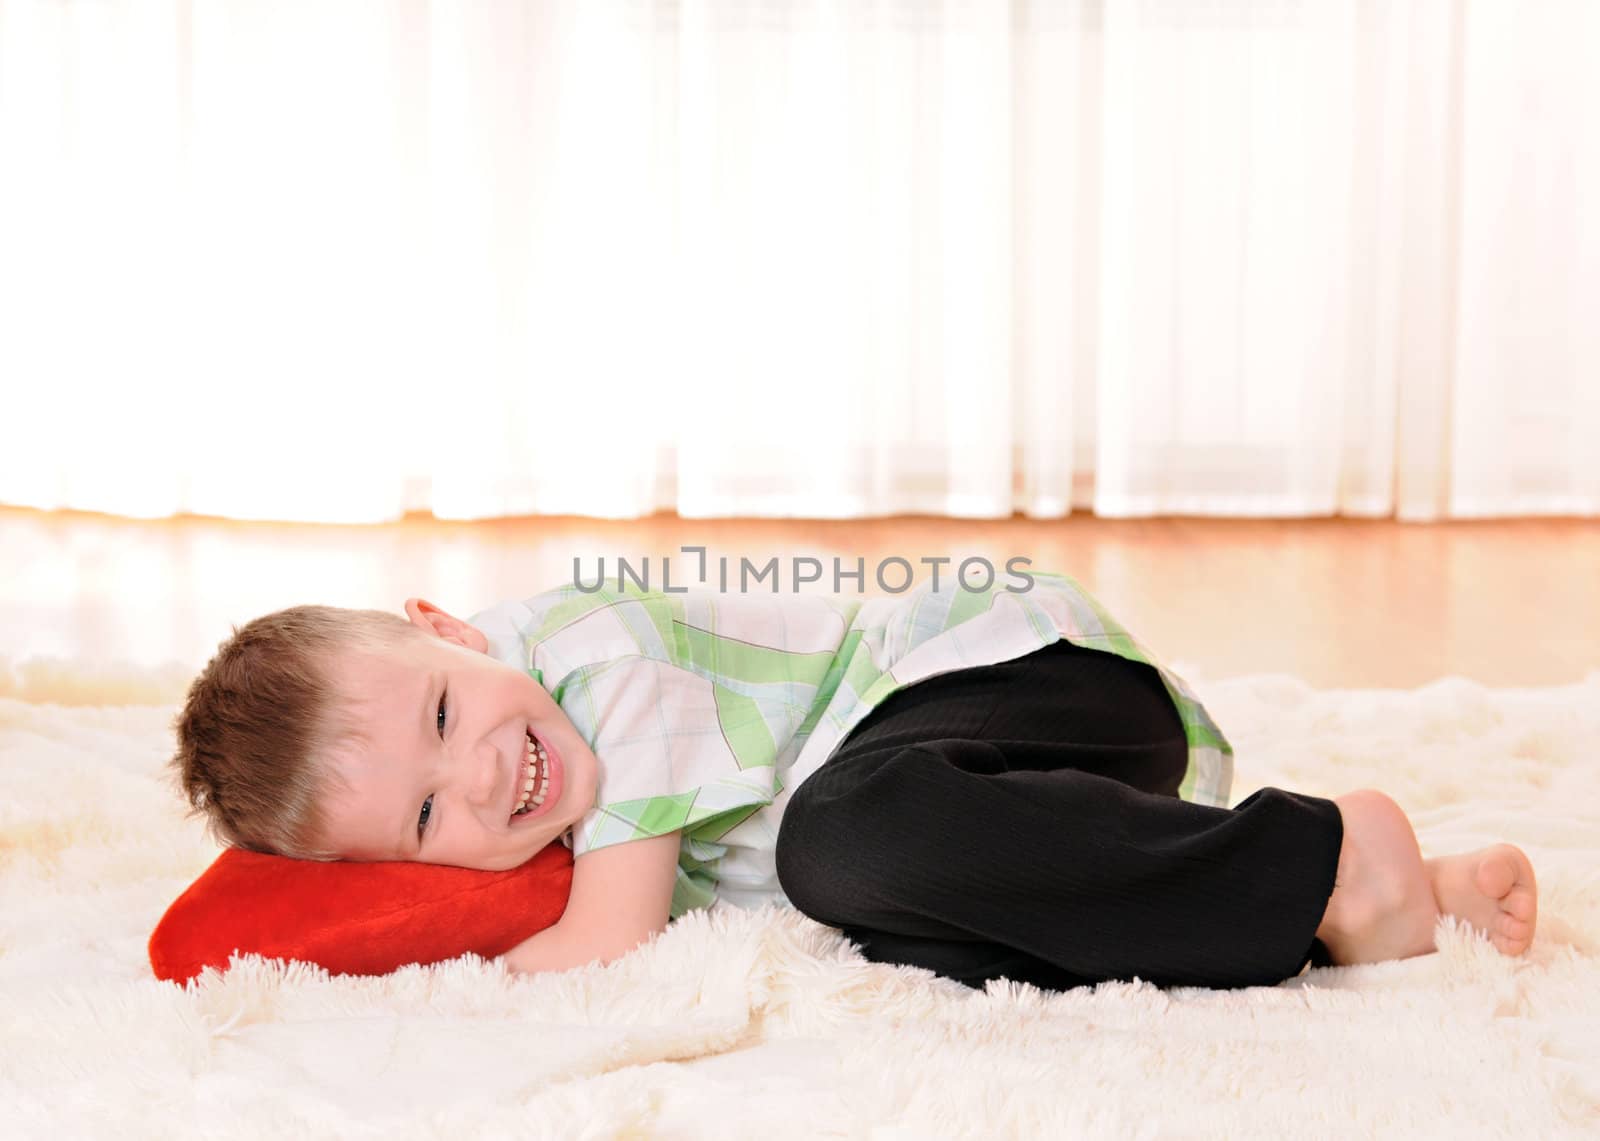 the child is lie on the floor with a red plush heart